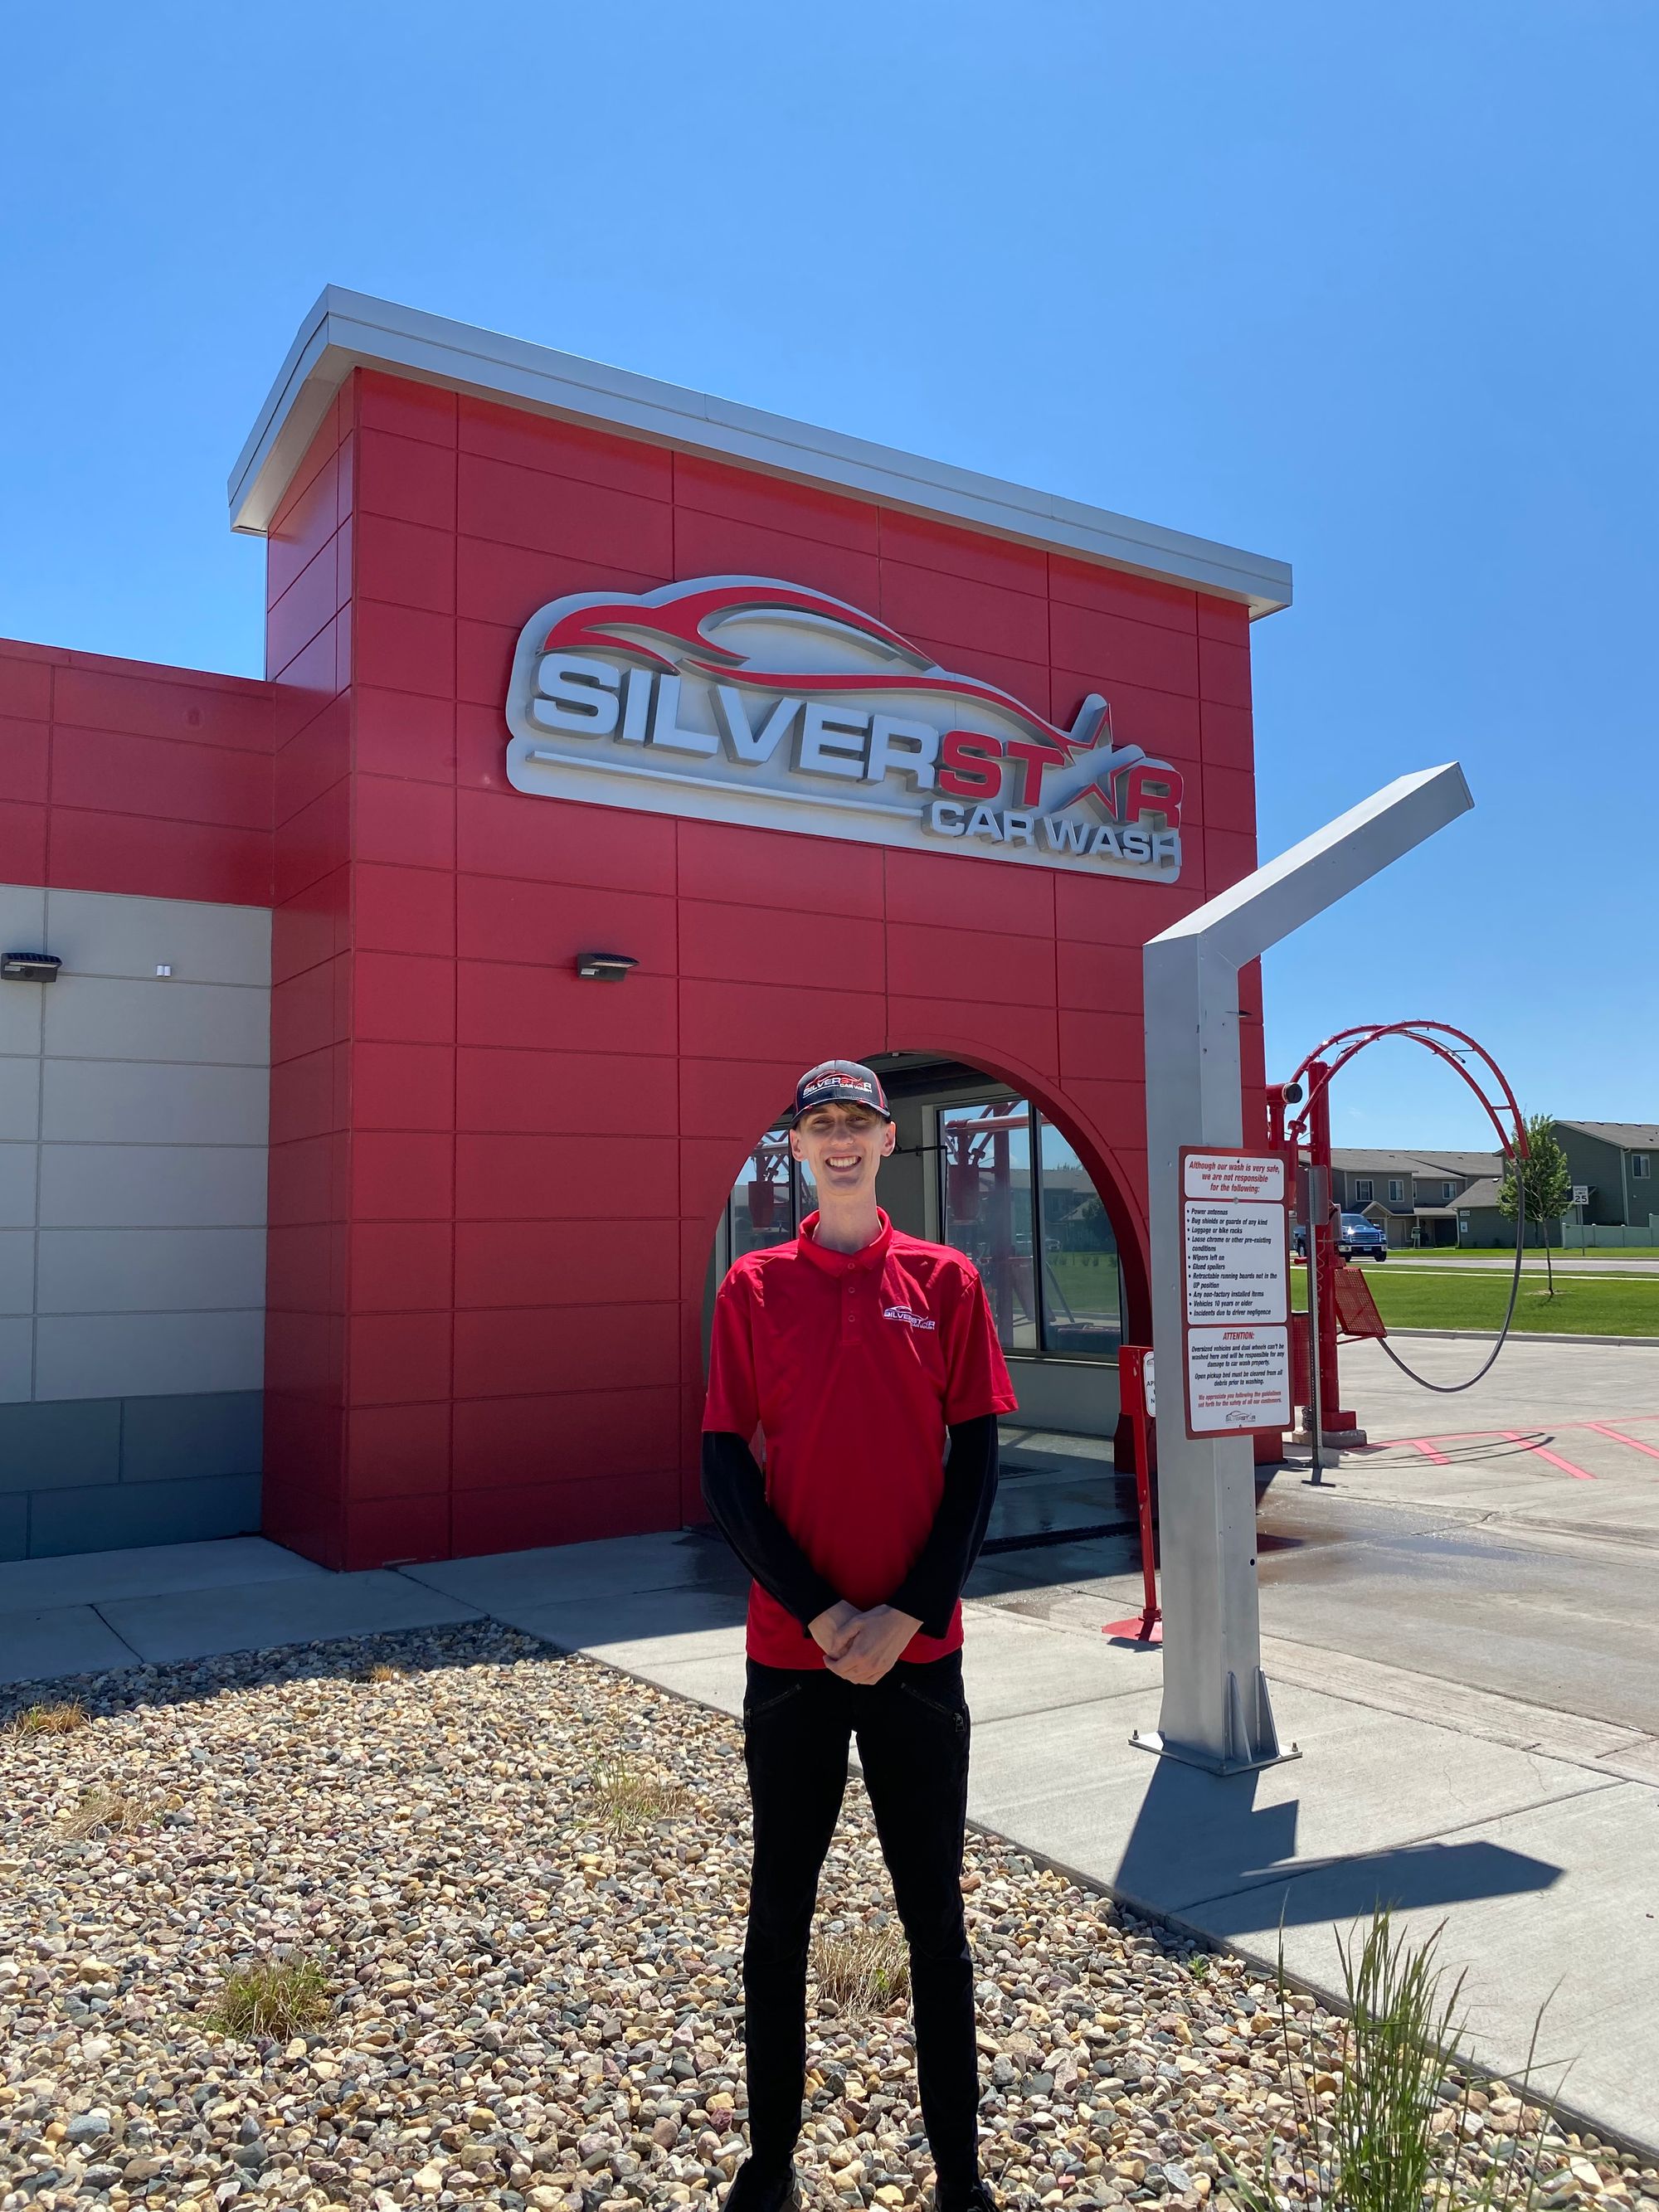 His passion for serving customers led him to Silverstar. Meet Kobe.